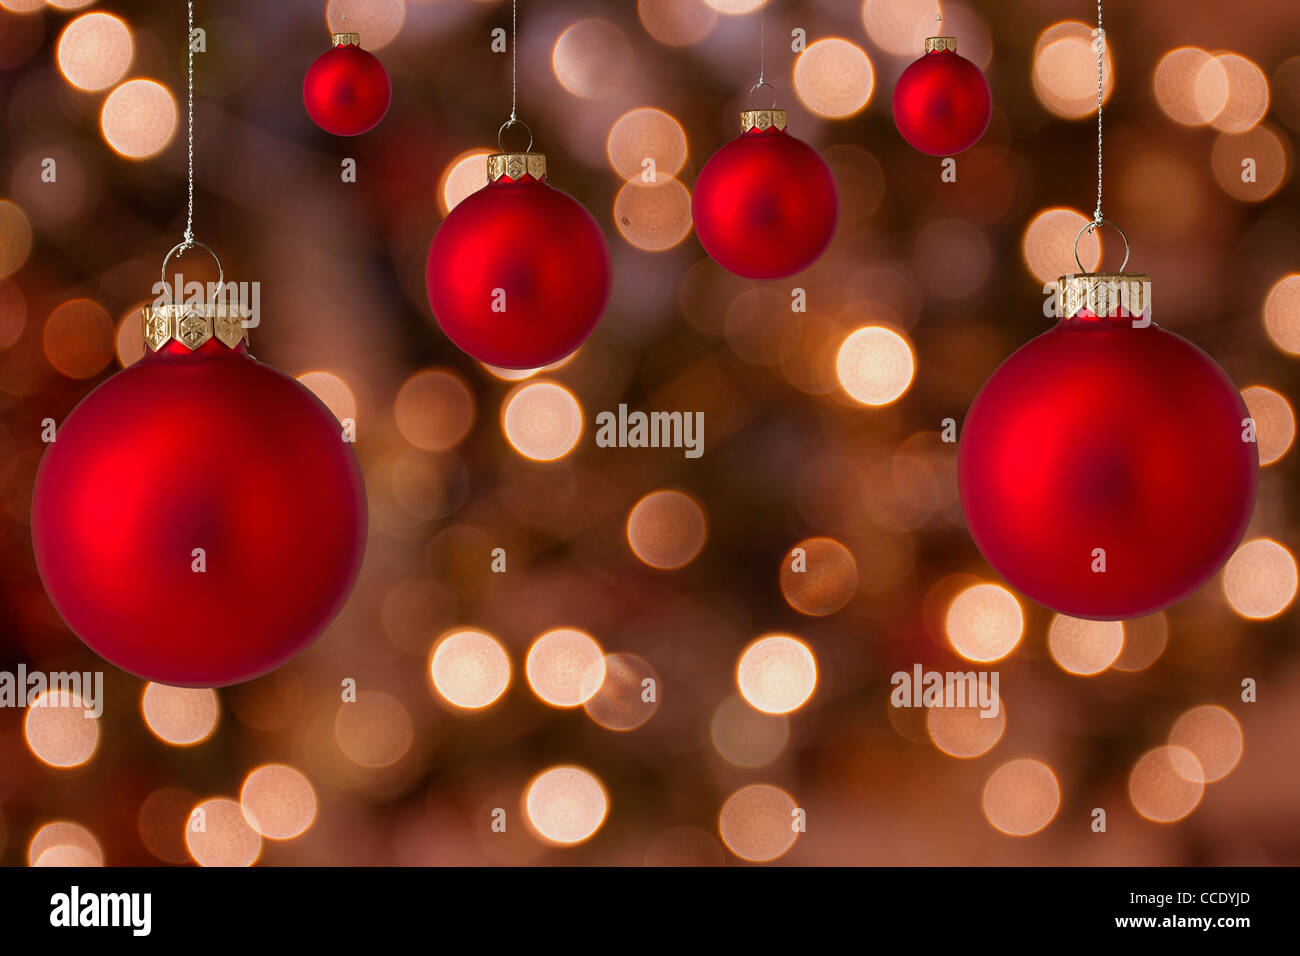 Christmas balls with blurred light background Stock Photo